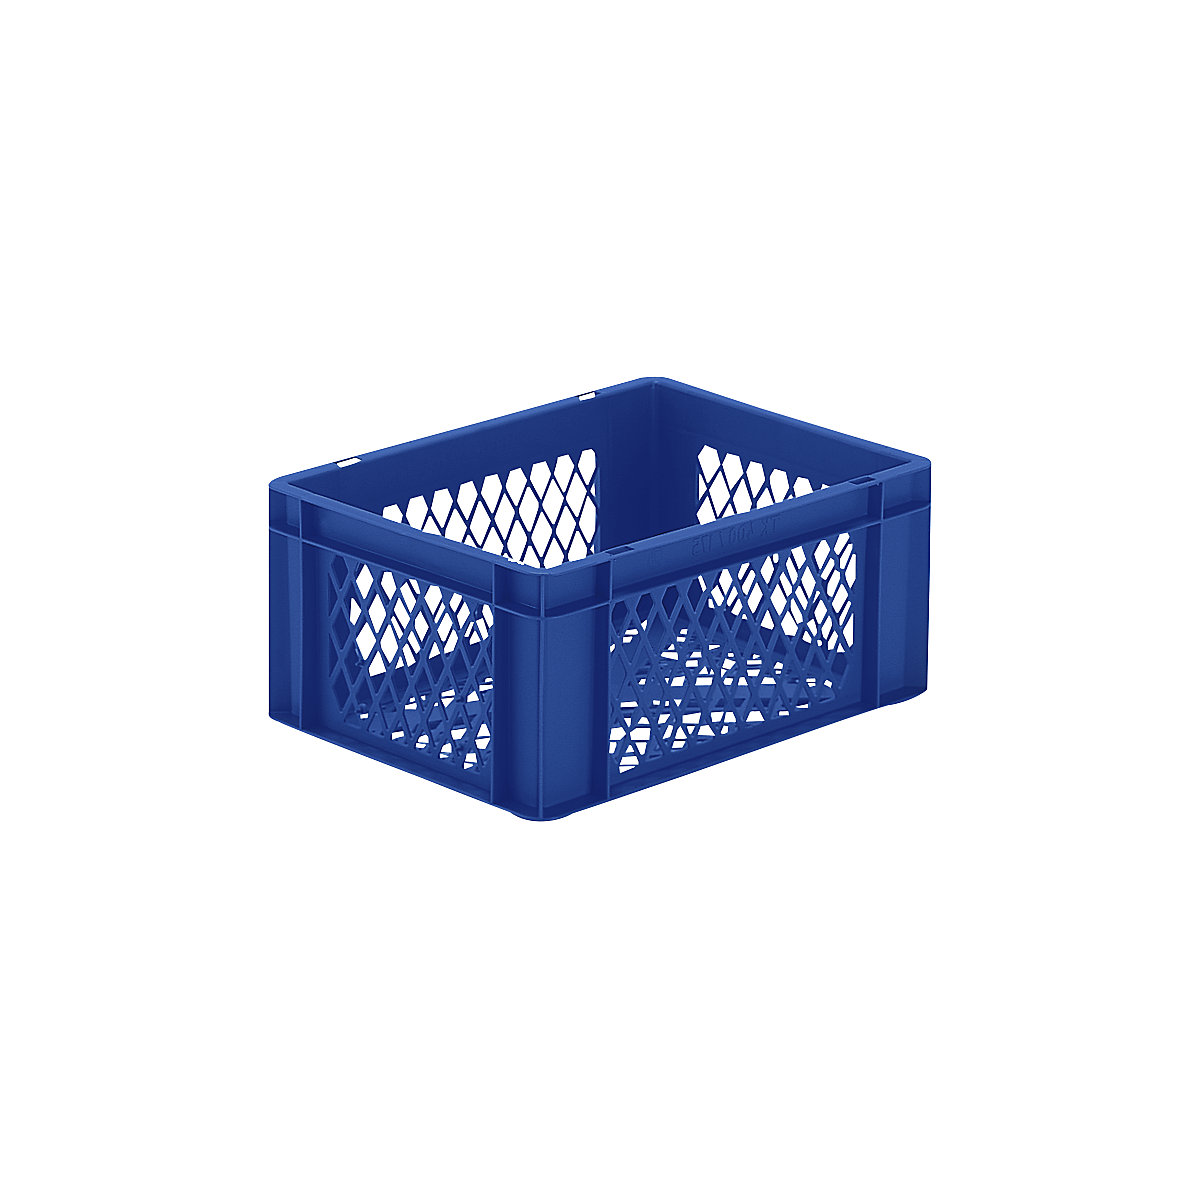 Euro stacking container, perforated walls and base, LxWxH 400 x 300 x 175 mm, blue, pack of 5-8